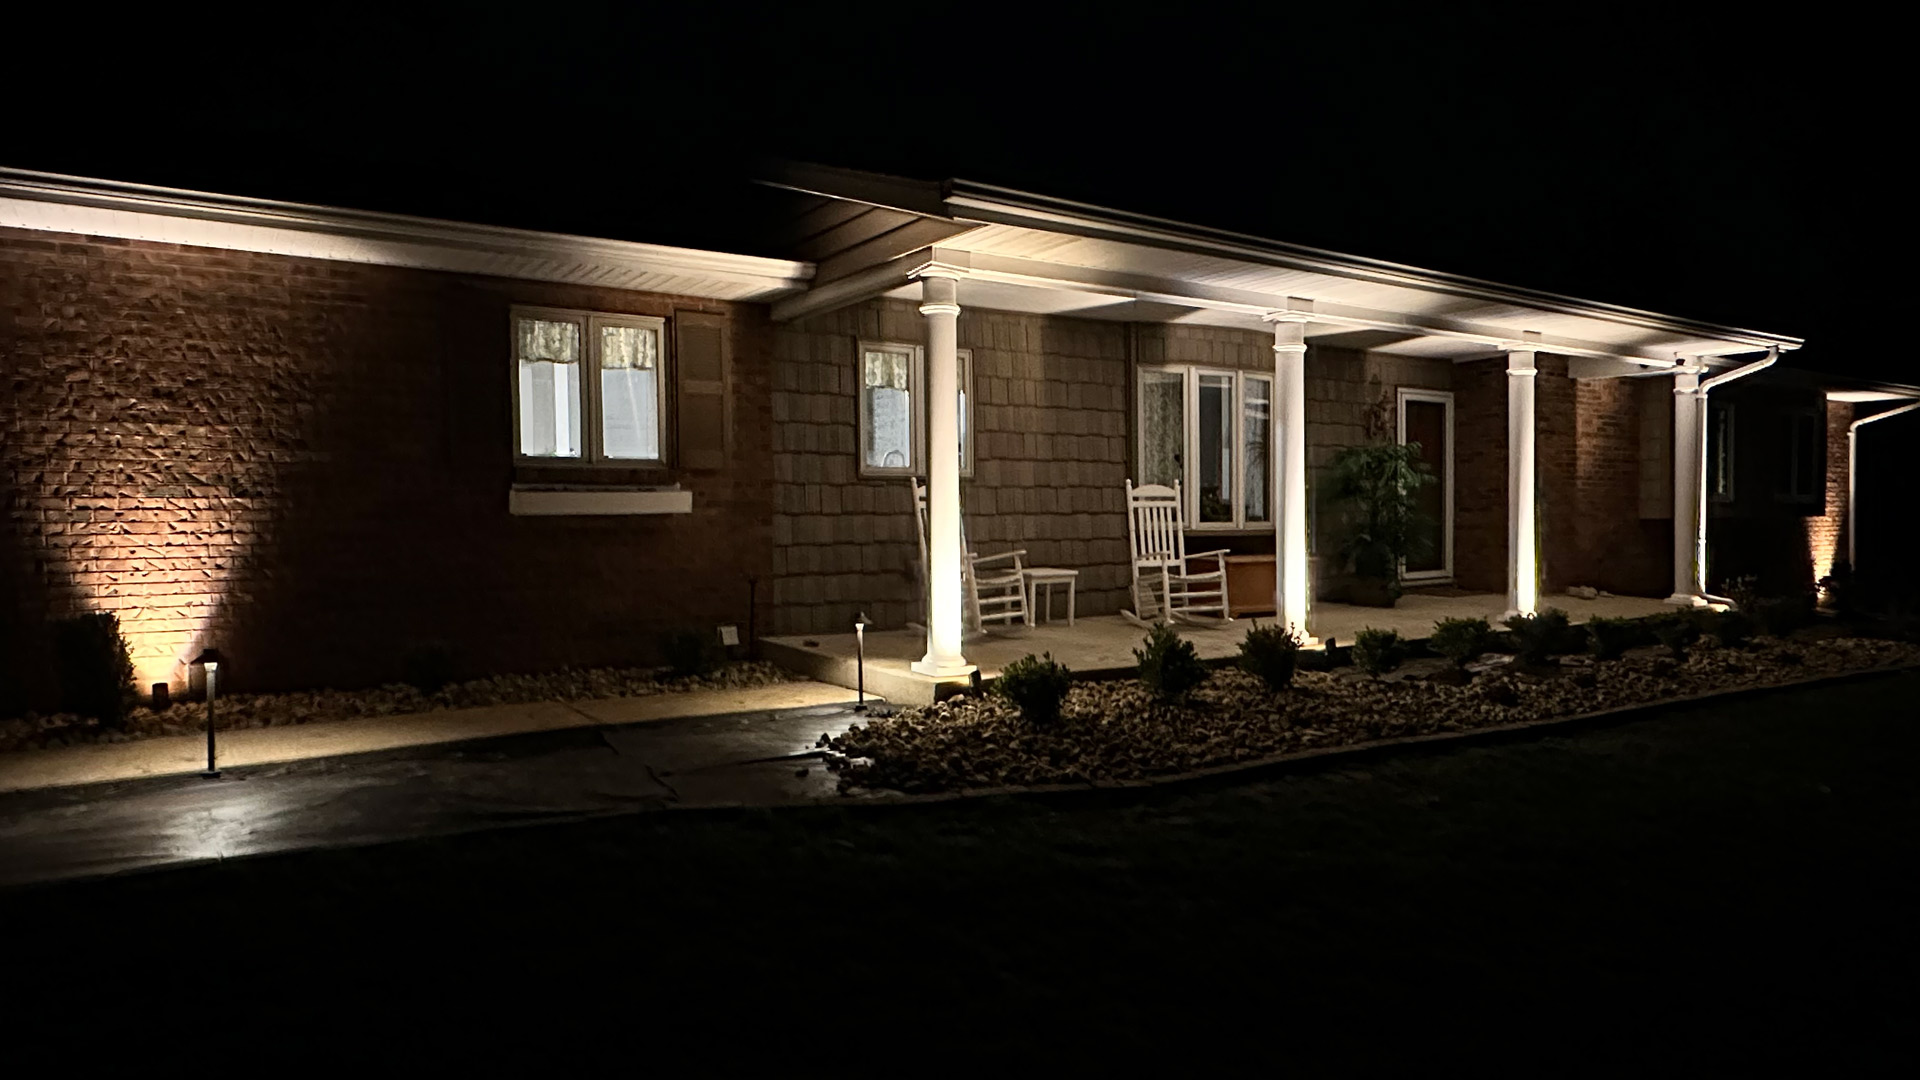 Outdoor lighting system recently installed at a home in Columbia, IL.